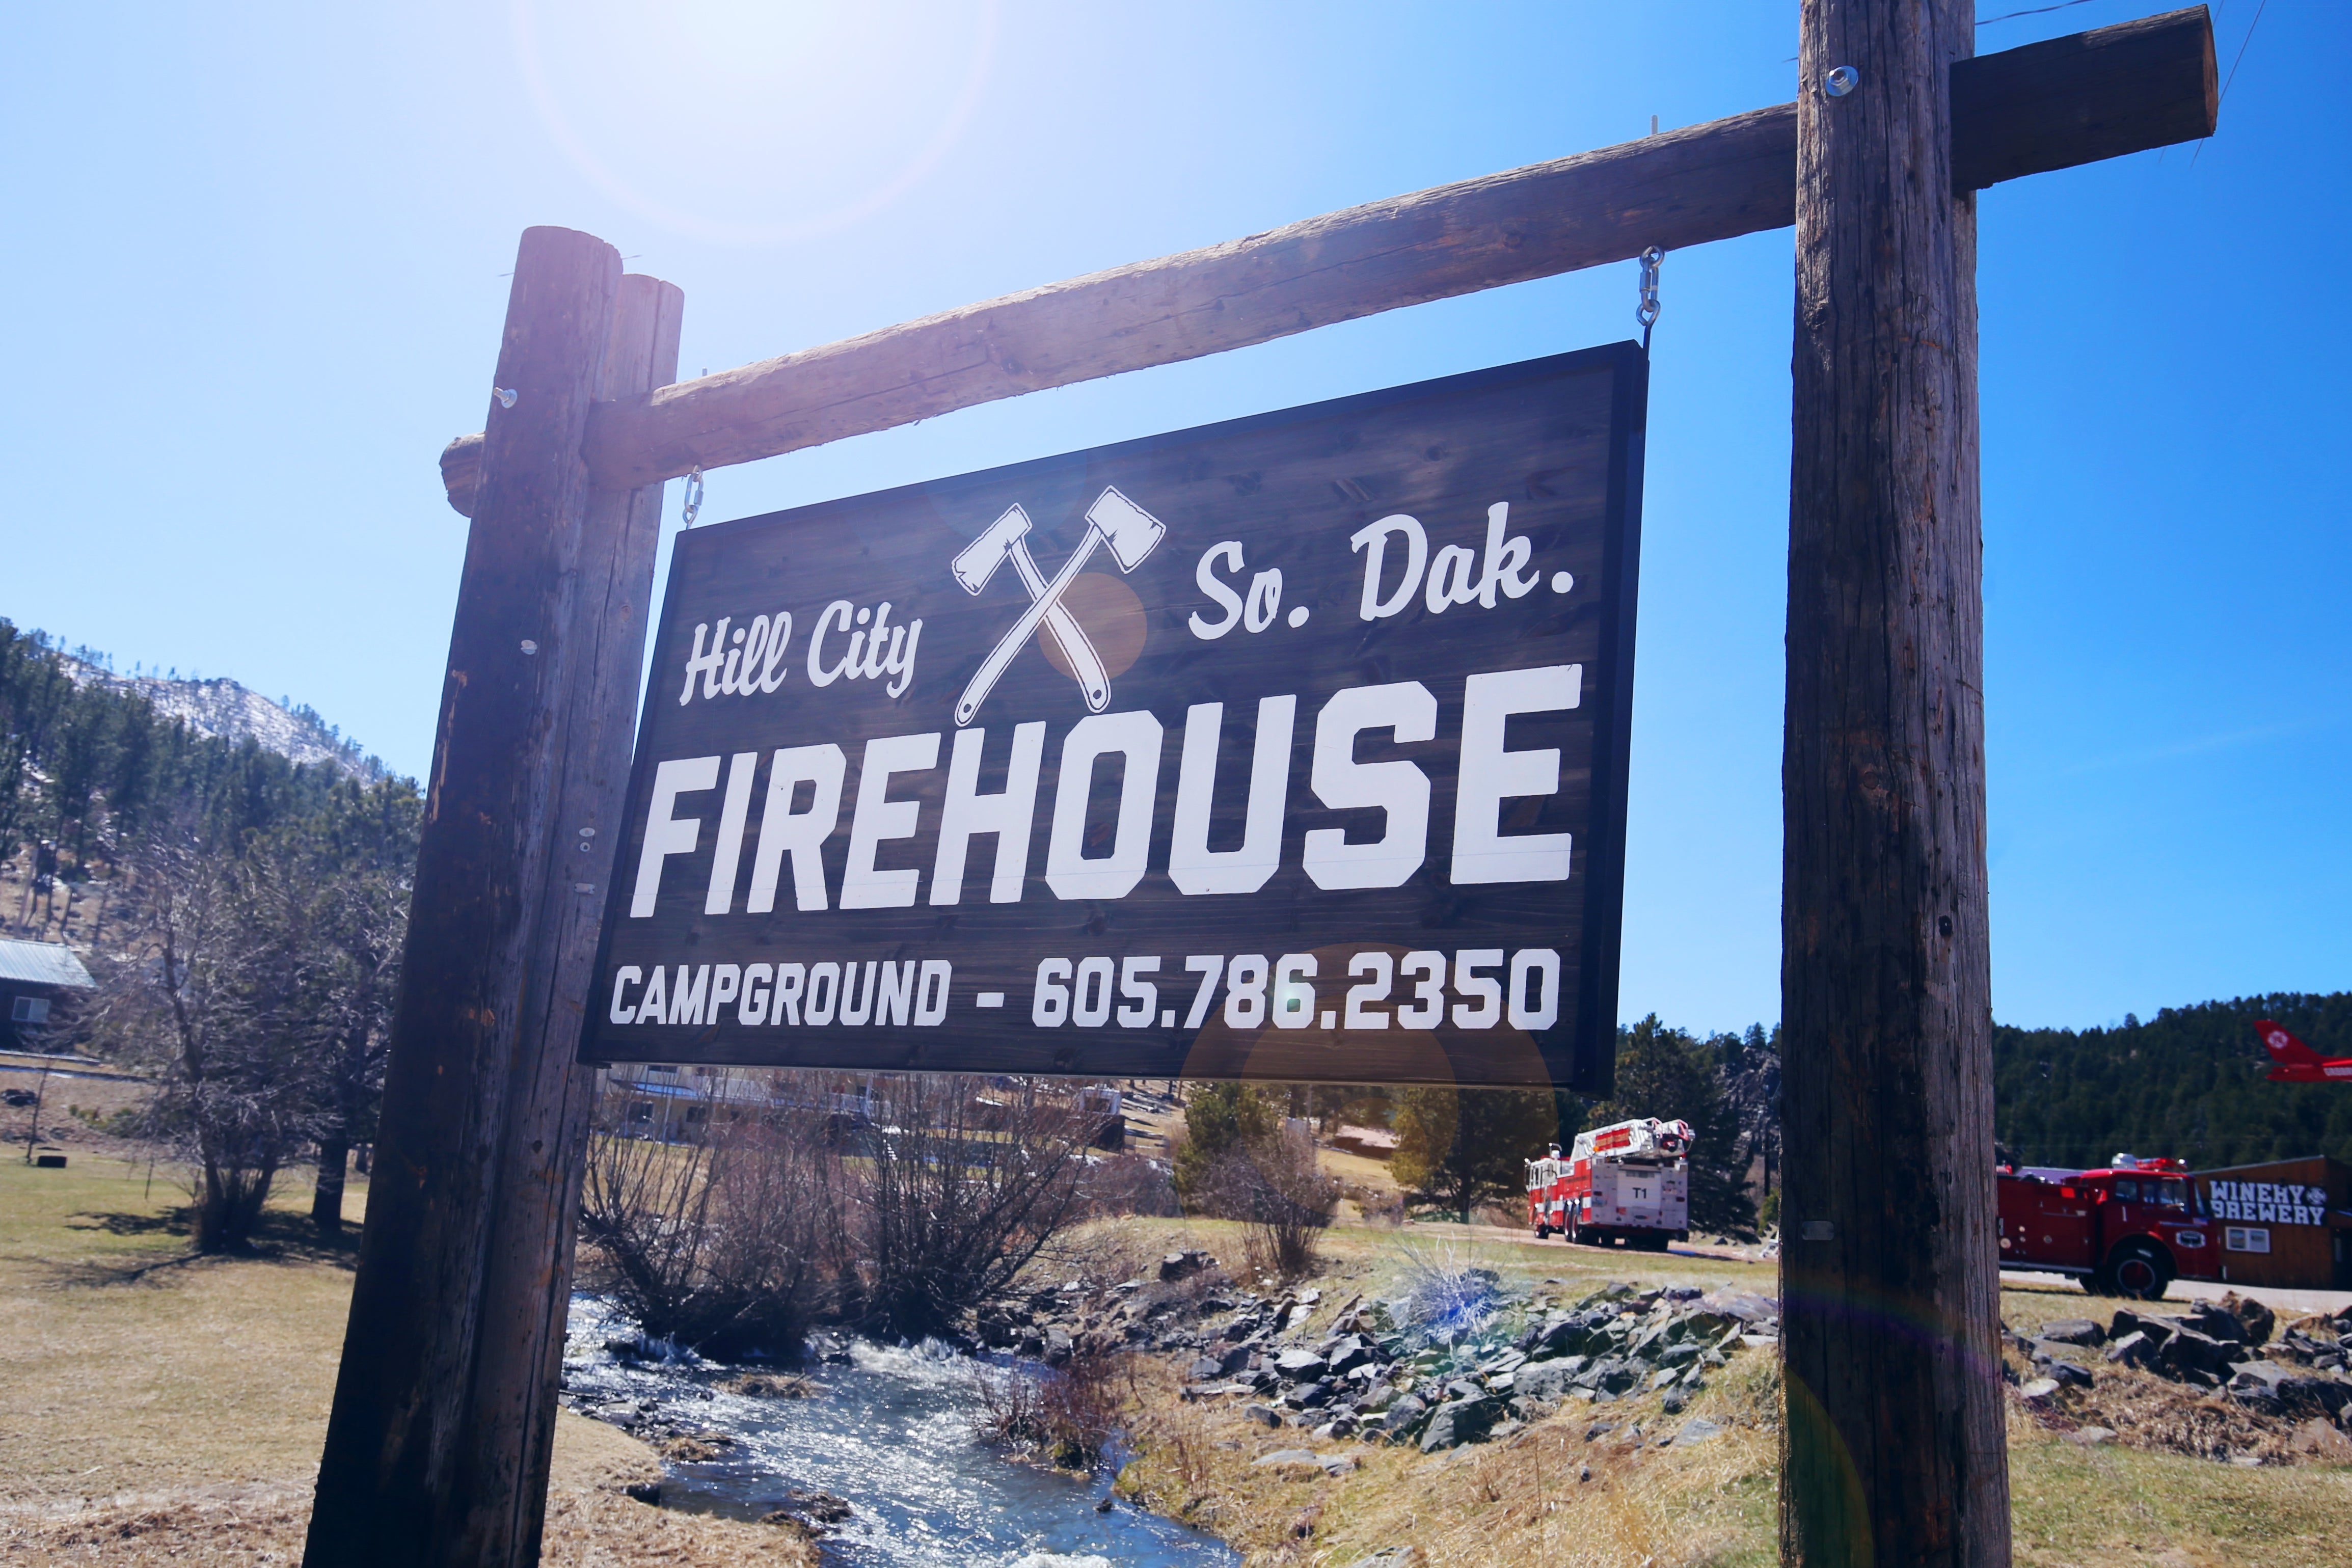 Sign for Firehouse Campground in Hill City